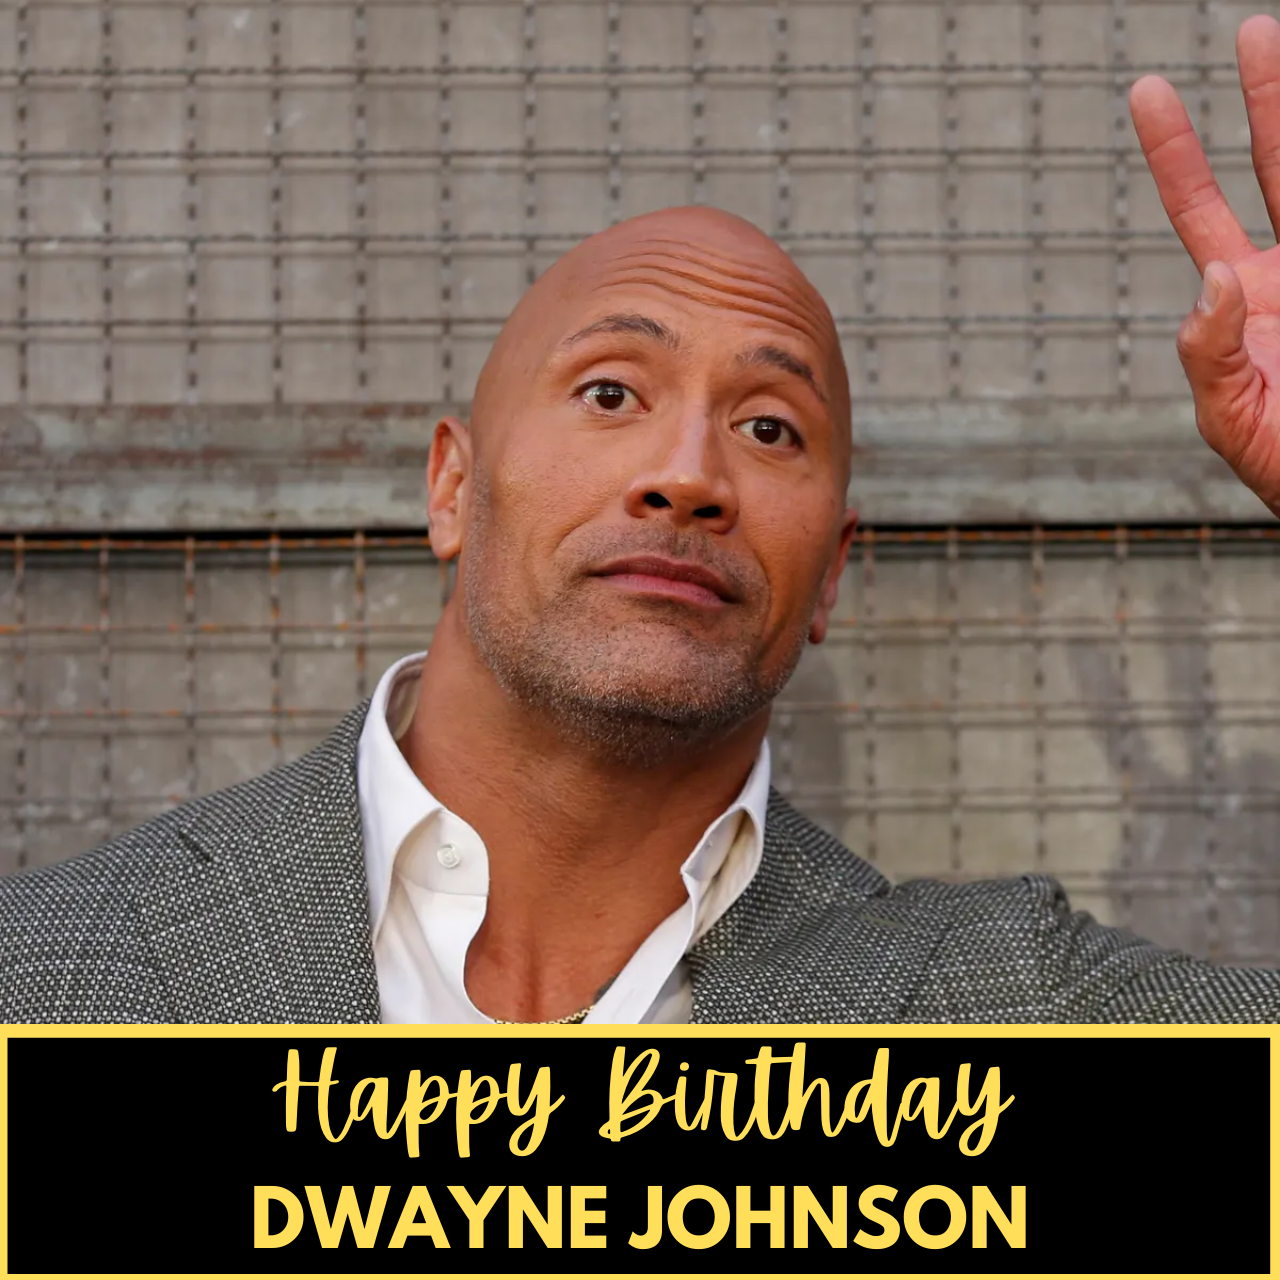 Happy Birthday Dwayne Johnson: Birthday Card, Wishes, Photos (Images), Gif, and Messages to share